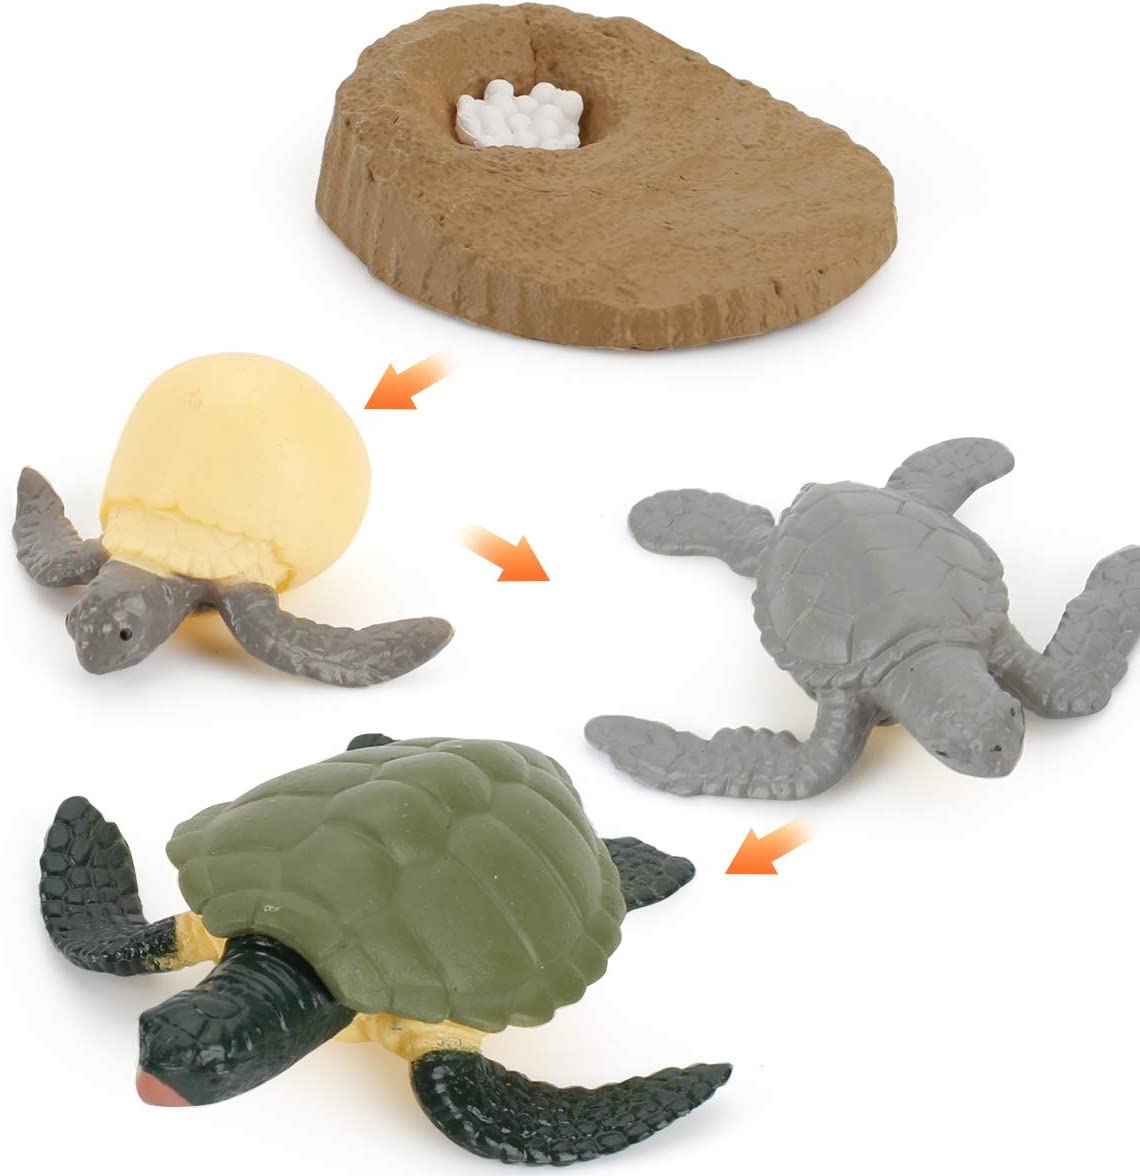 life cycle of sea turtle